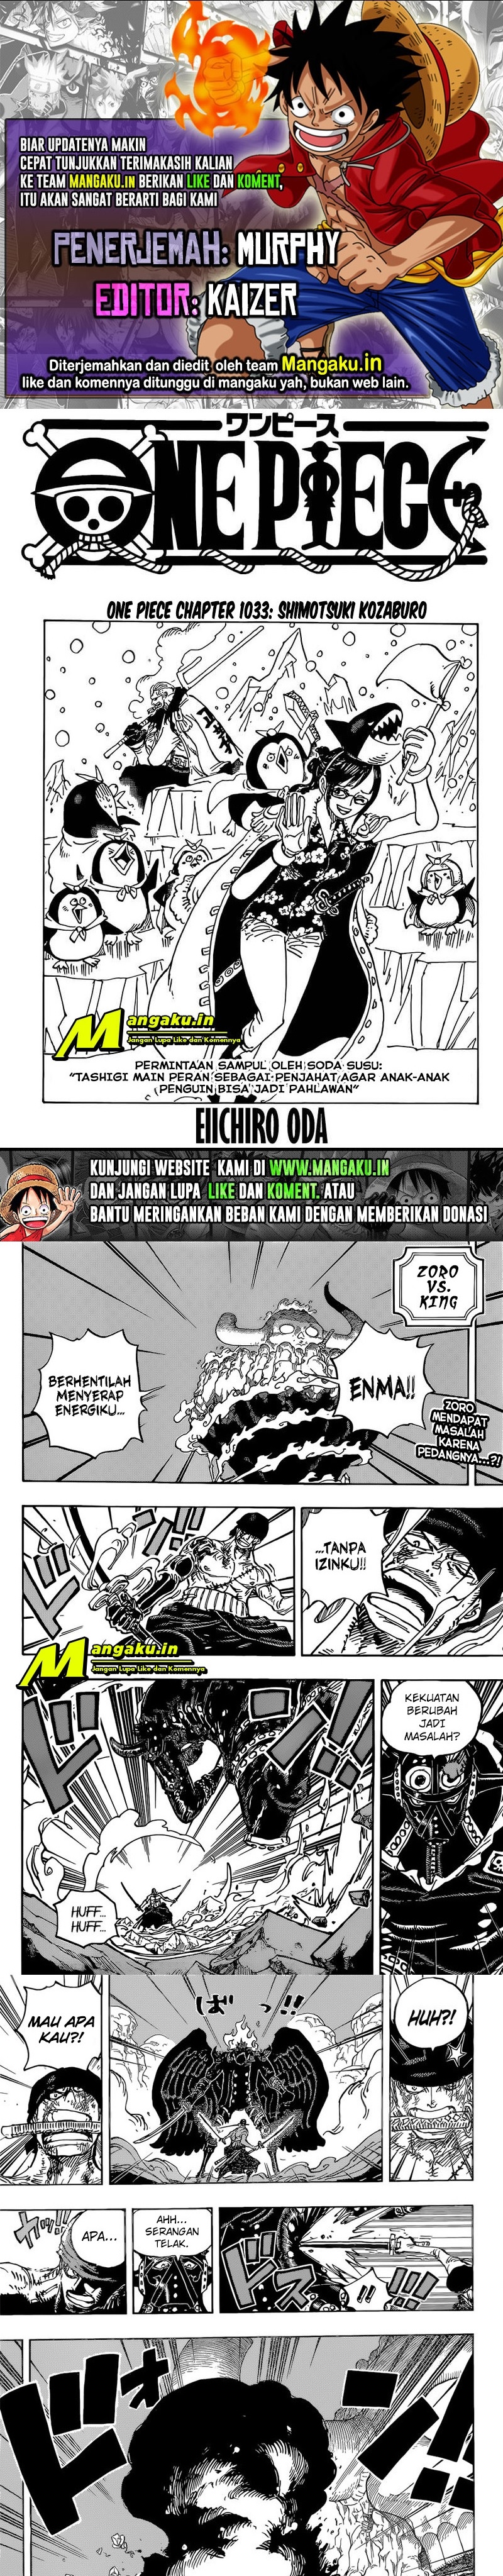 One Piece Chapter 1033 HQ Bahasa Indonesia